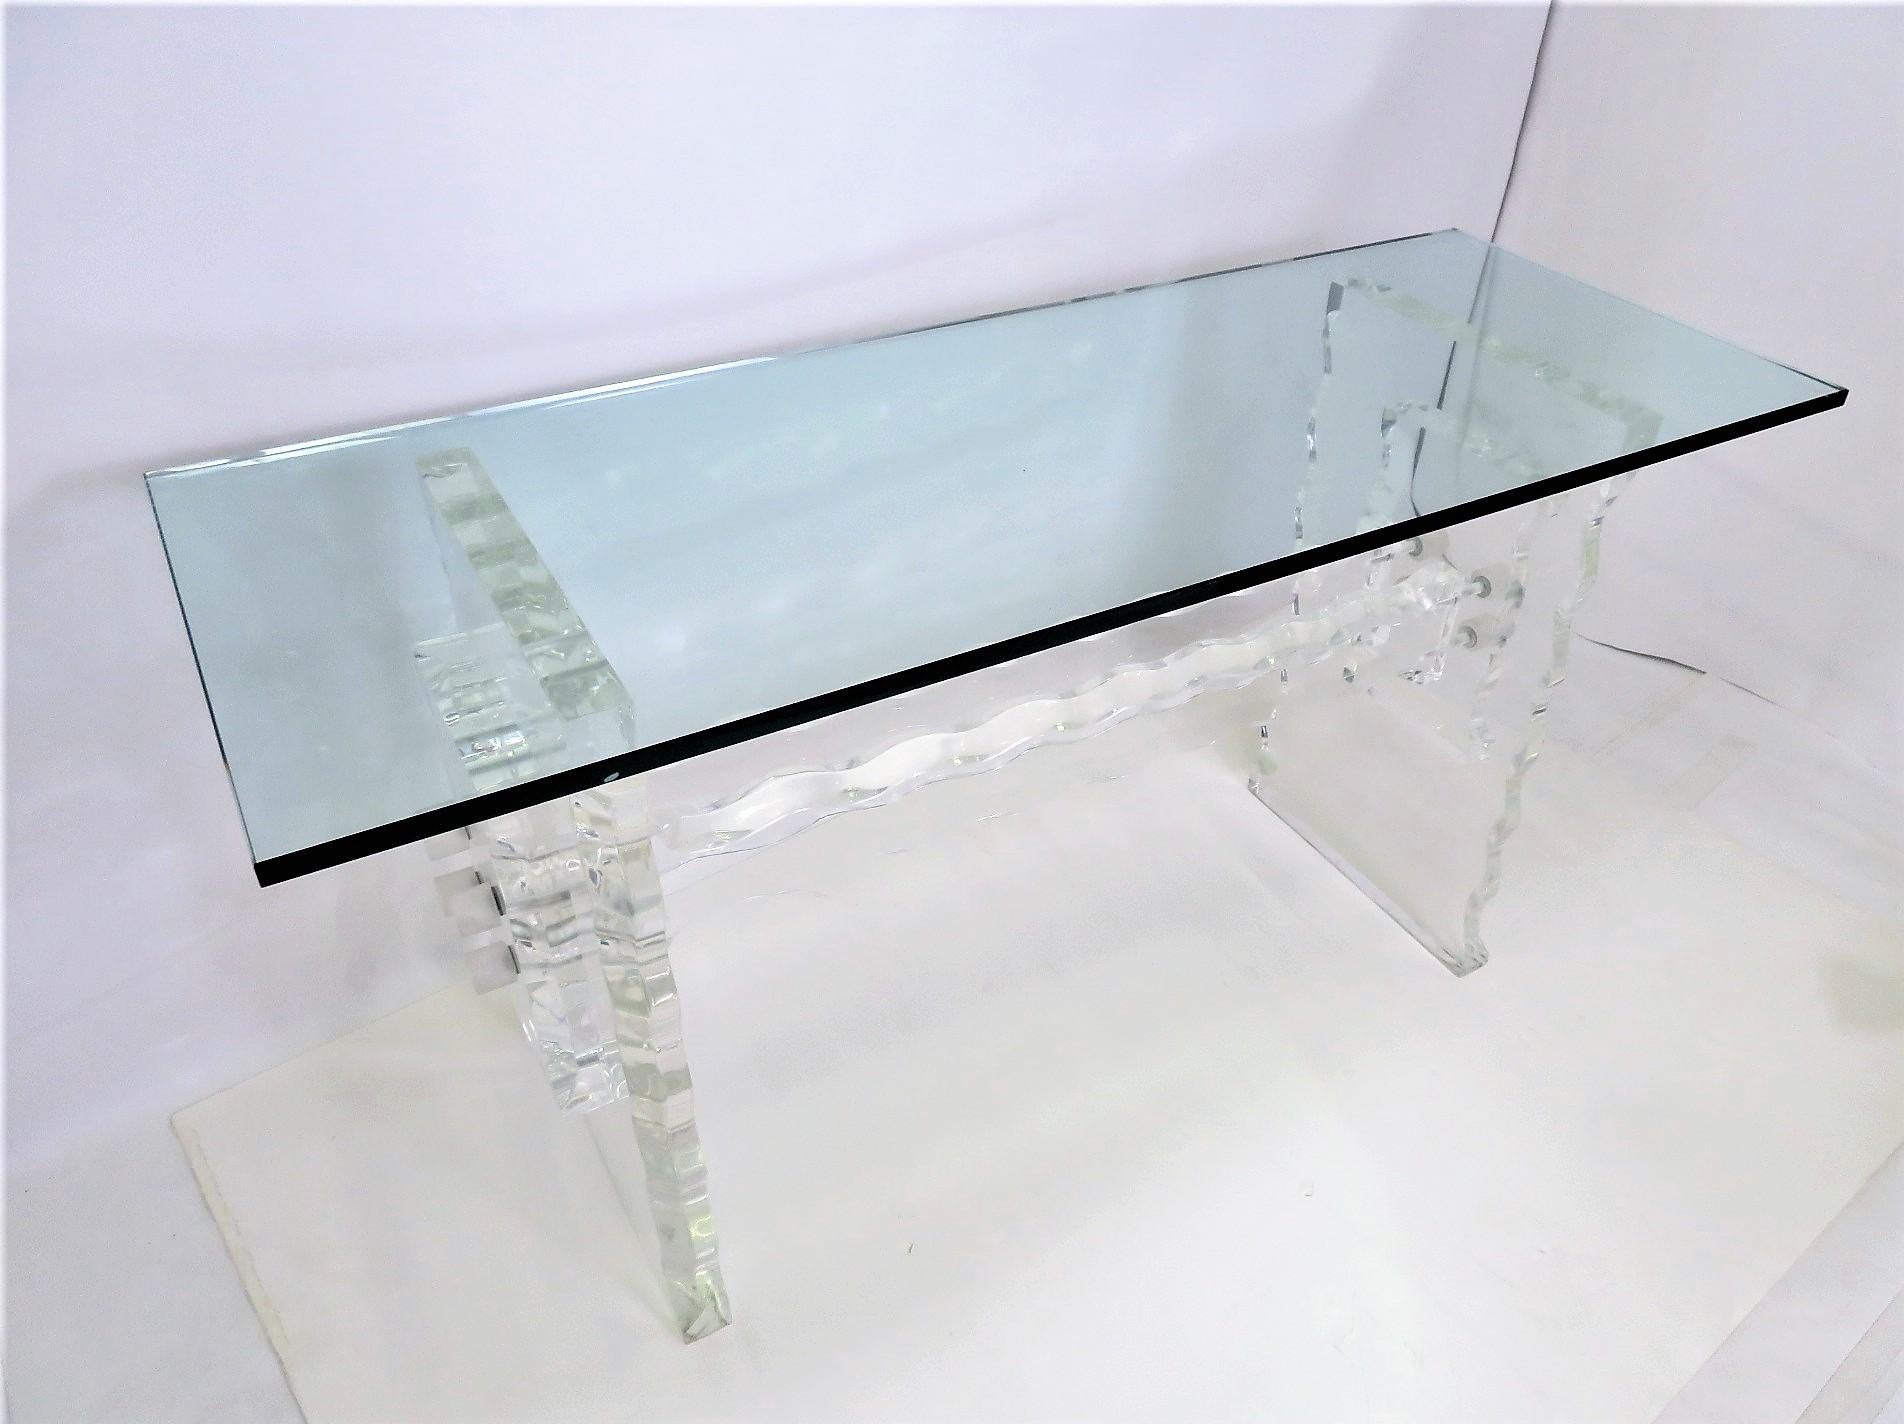 A glass topped Lucite based Console in the style and manner of Charles Hollis Jones and Leon Frost. Ruffle edged thick Lucite defines the base of this console or table, like an ice carving with a 3/4 inch thick glass rectangular top. Awesome curl